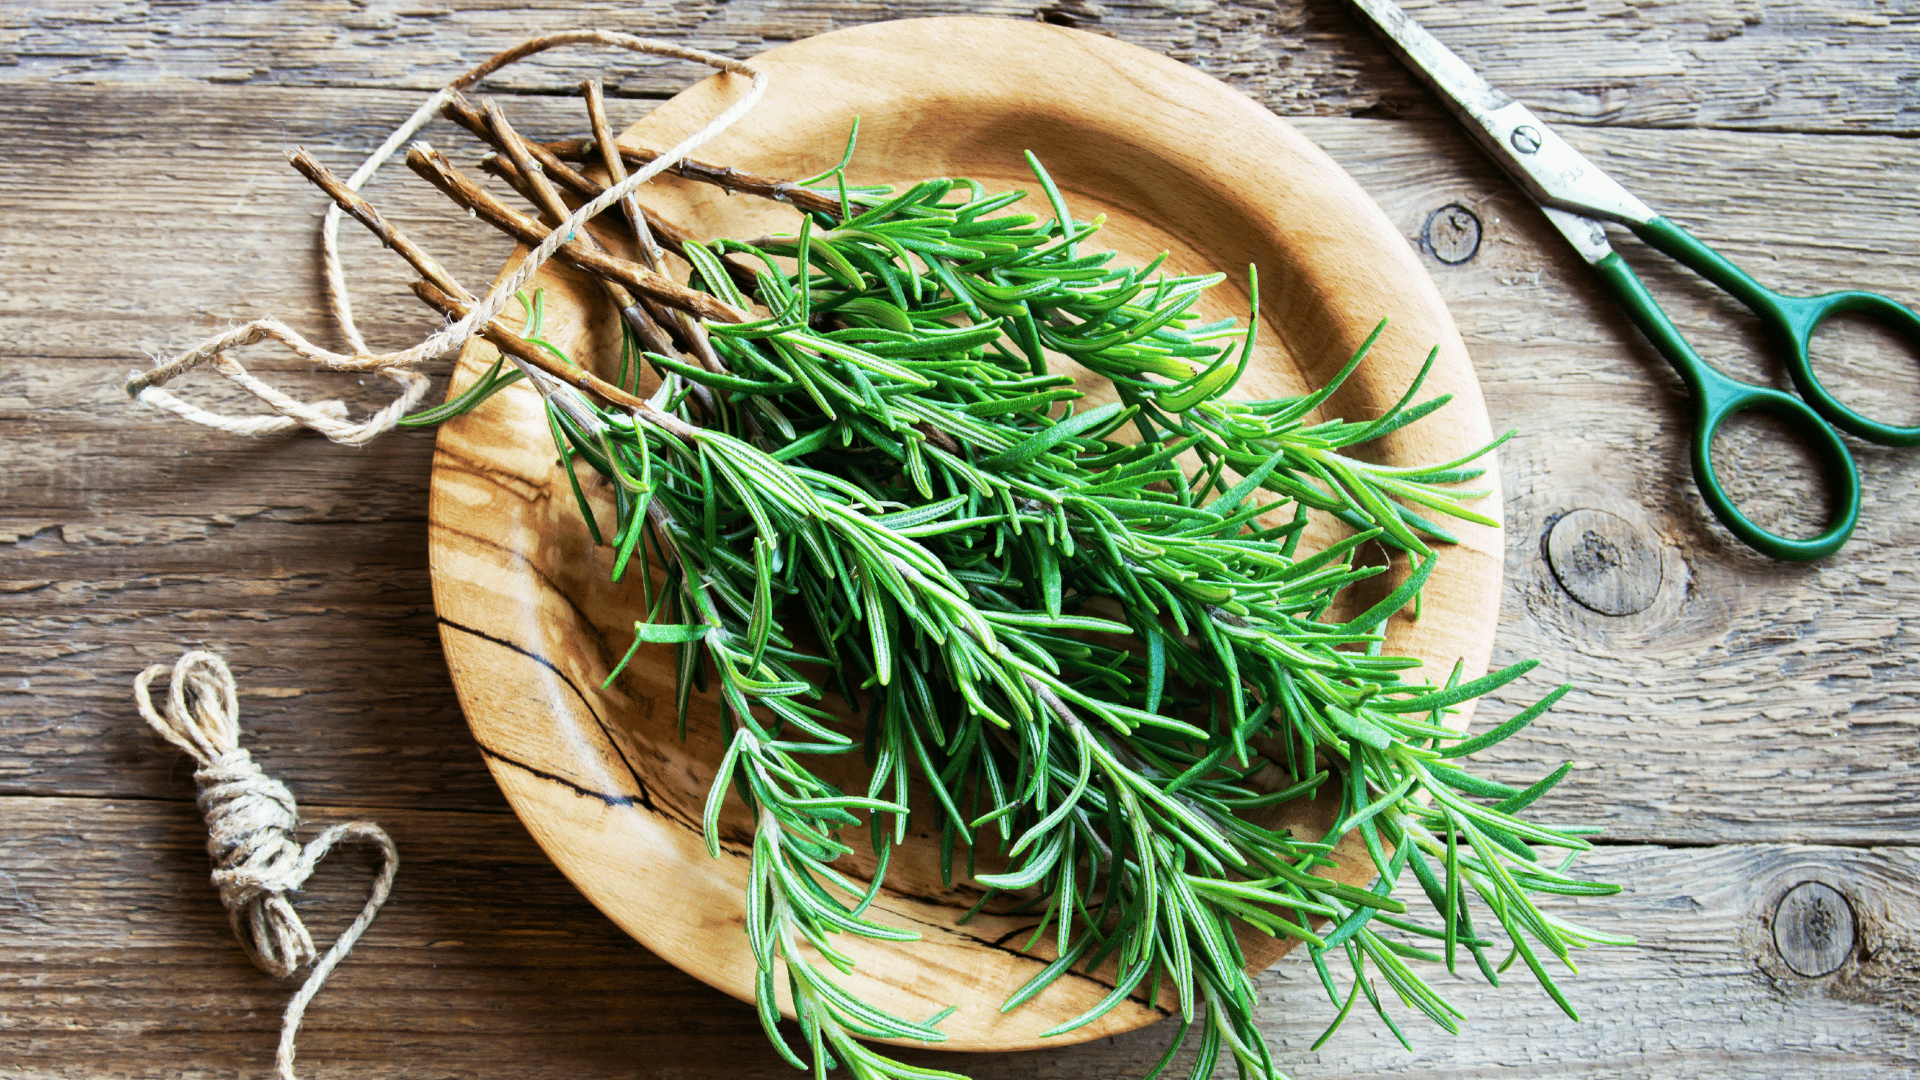 What Is Rosemary?